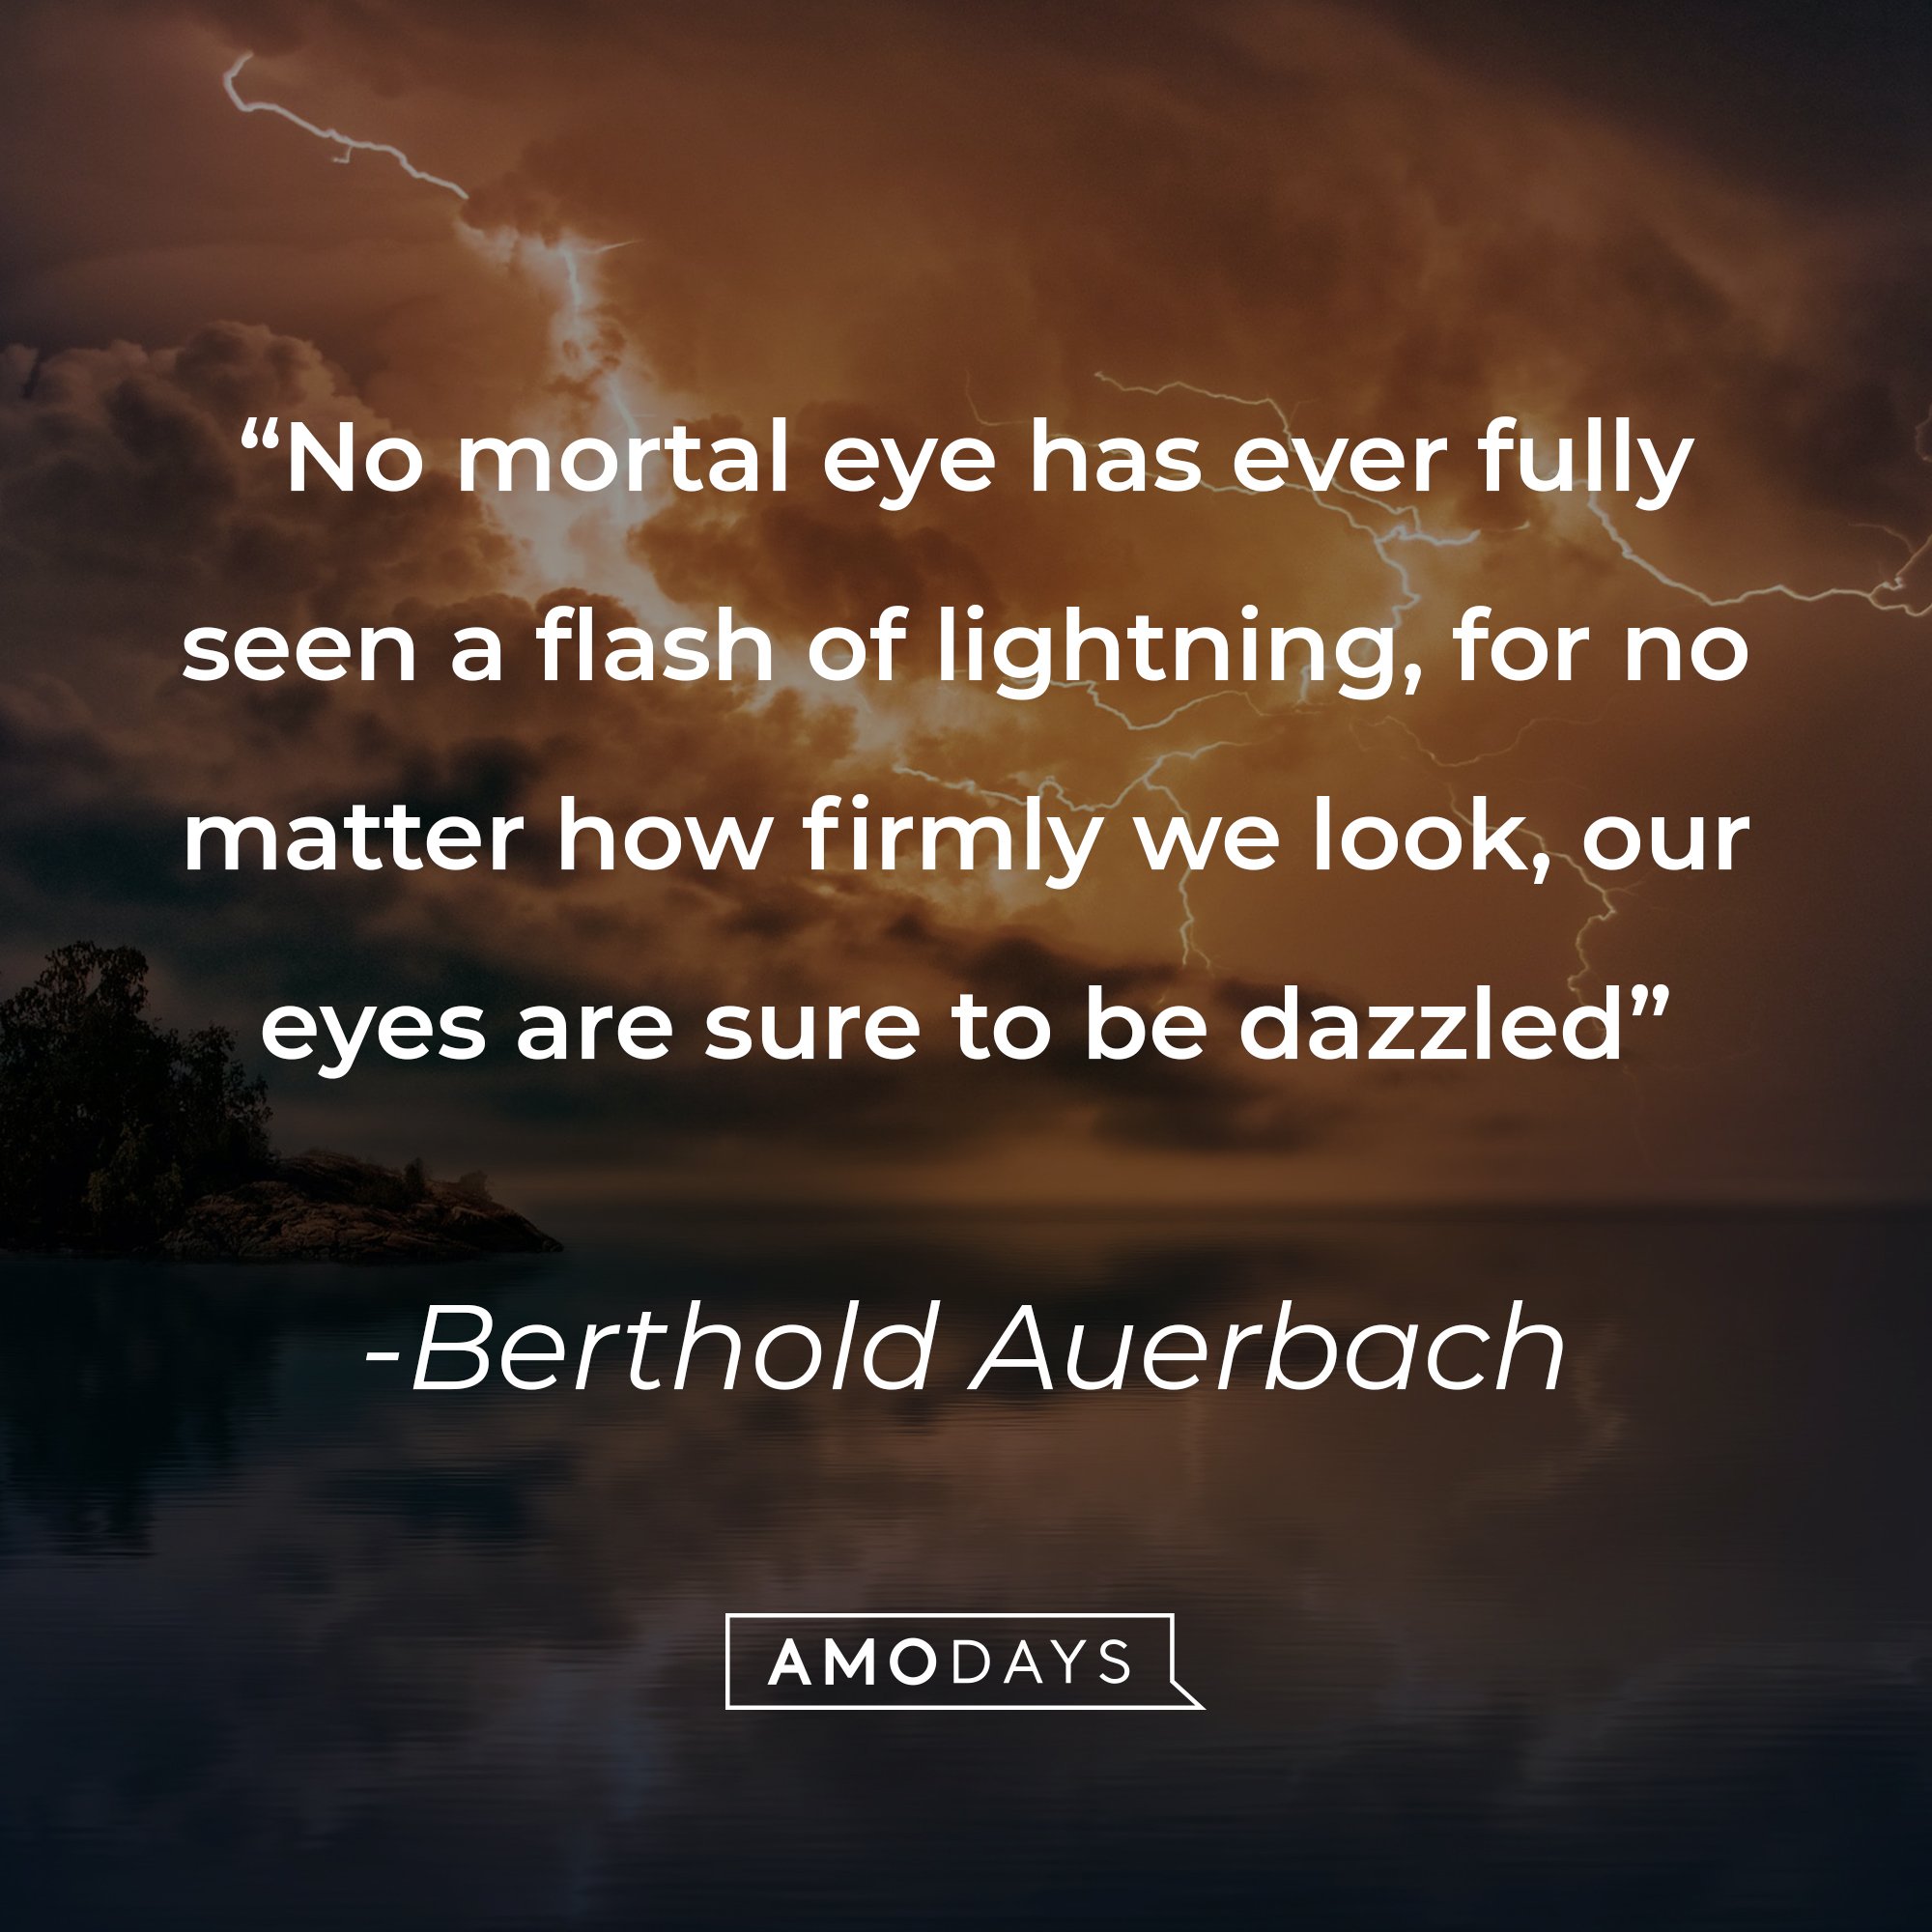 Berthold Auerbach’s quote: "No mortal eye has ever fully seen a flash of lightning, for no matter how firmly we look, our eyes are sure to be dazzled." | Image: AmoDays    